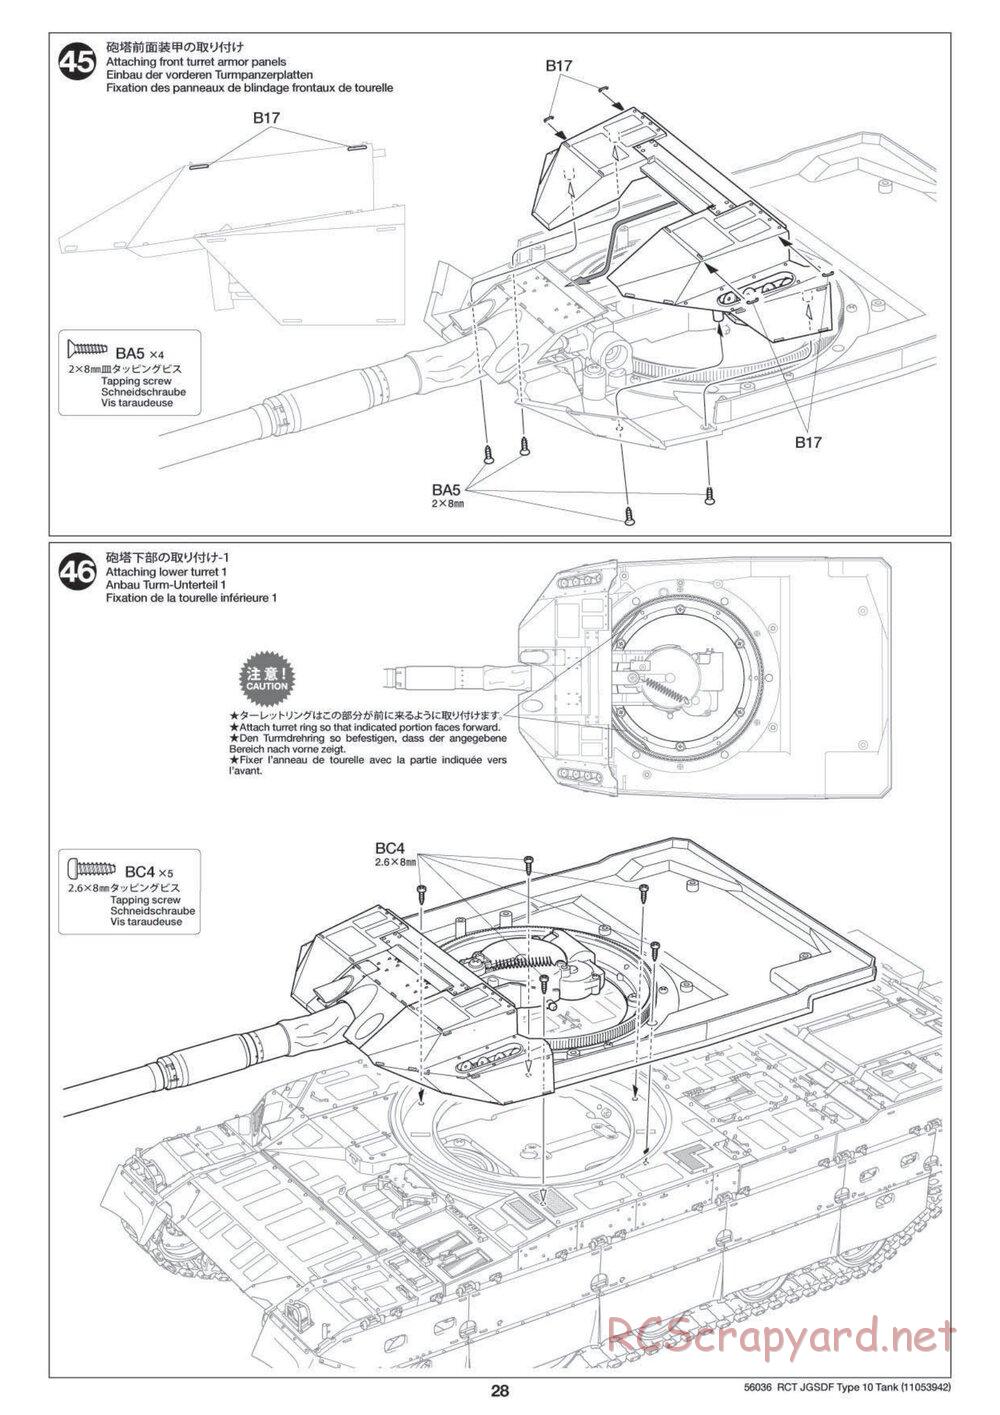 Tamiya - JGSDF Type 10 Tank - 1/16 Scale Chassis - Manual - Page 28